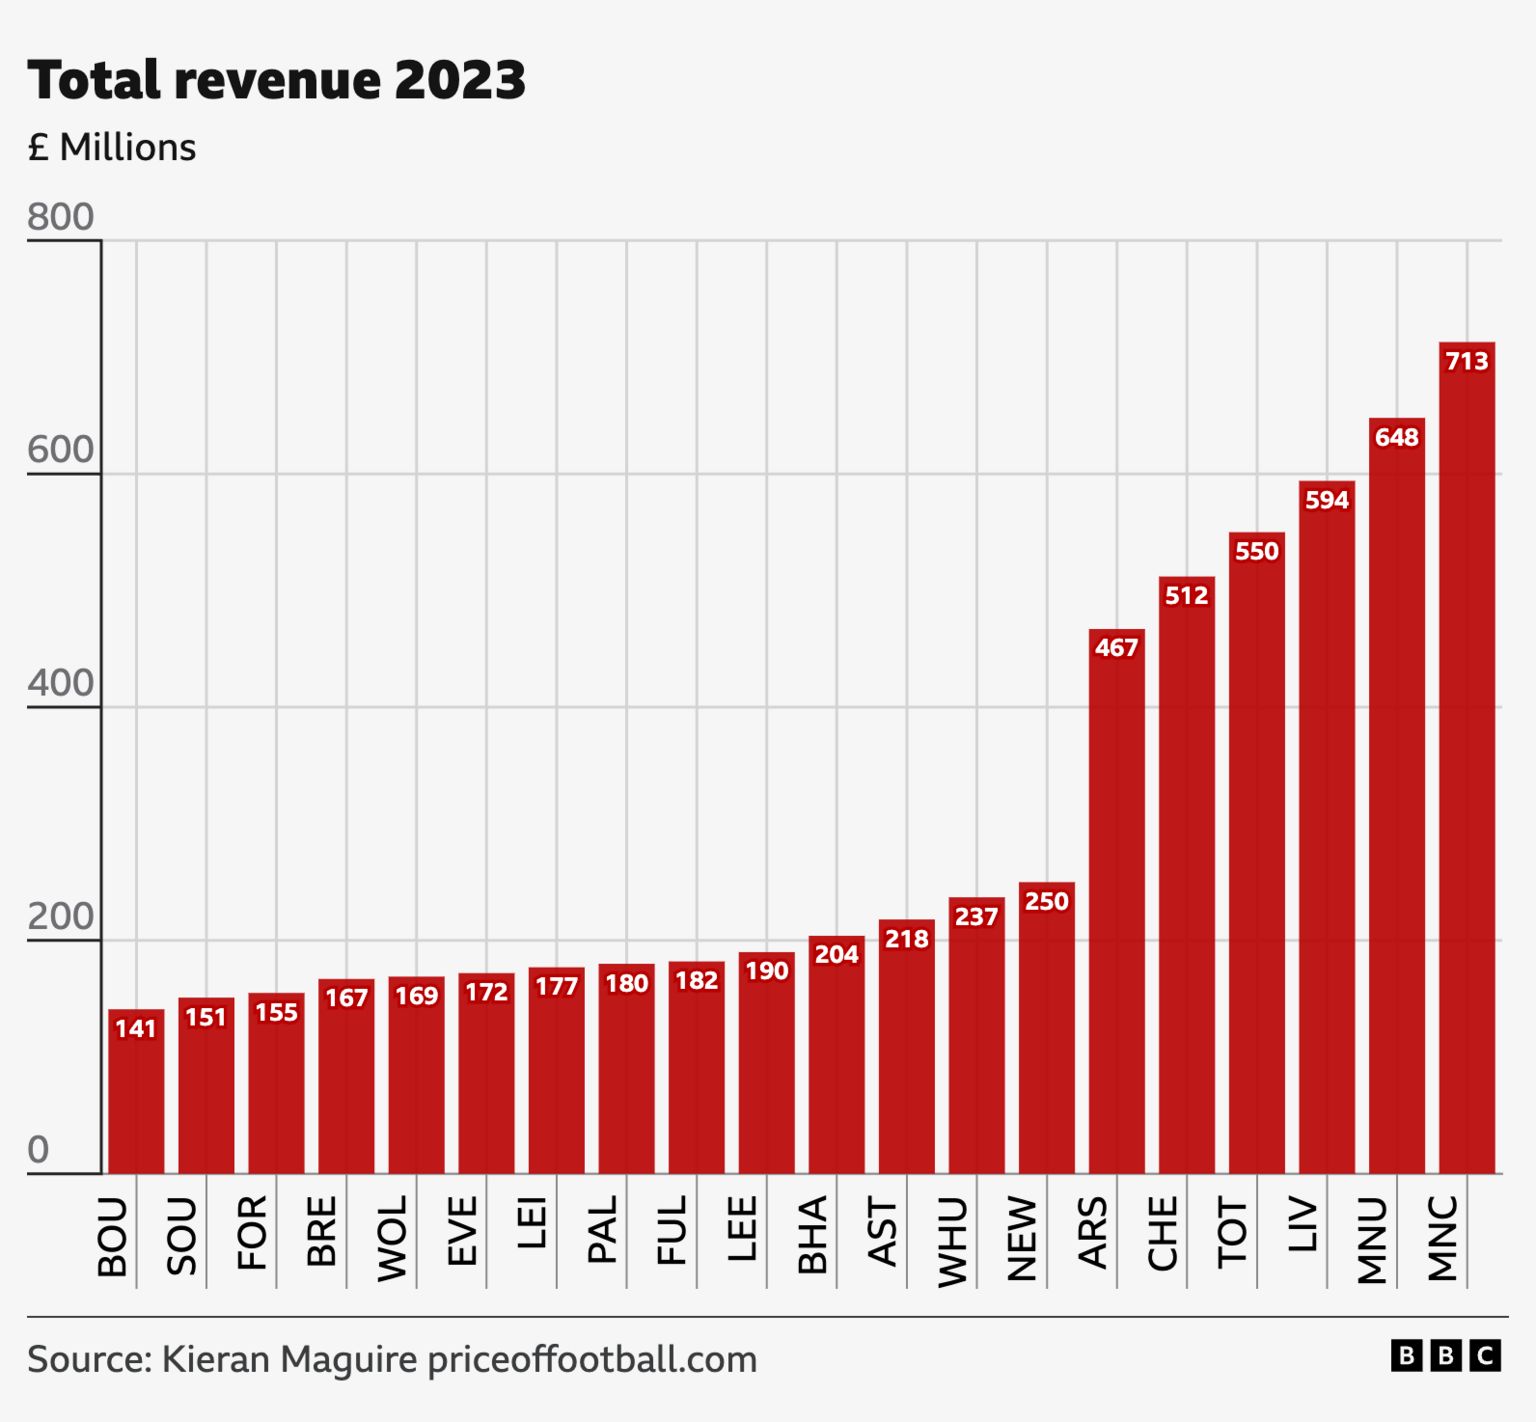 This chart shows the total venue made per Premier League club in 2023 - including matchday, broadcast and commercial income